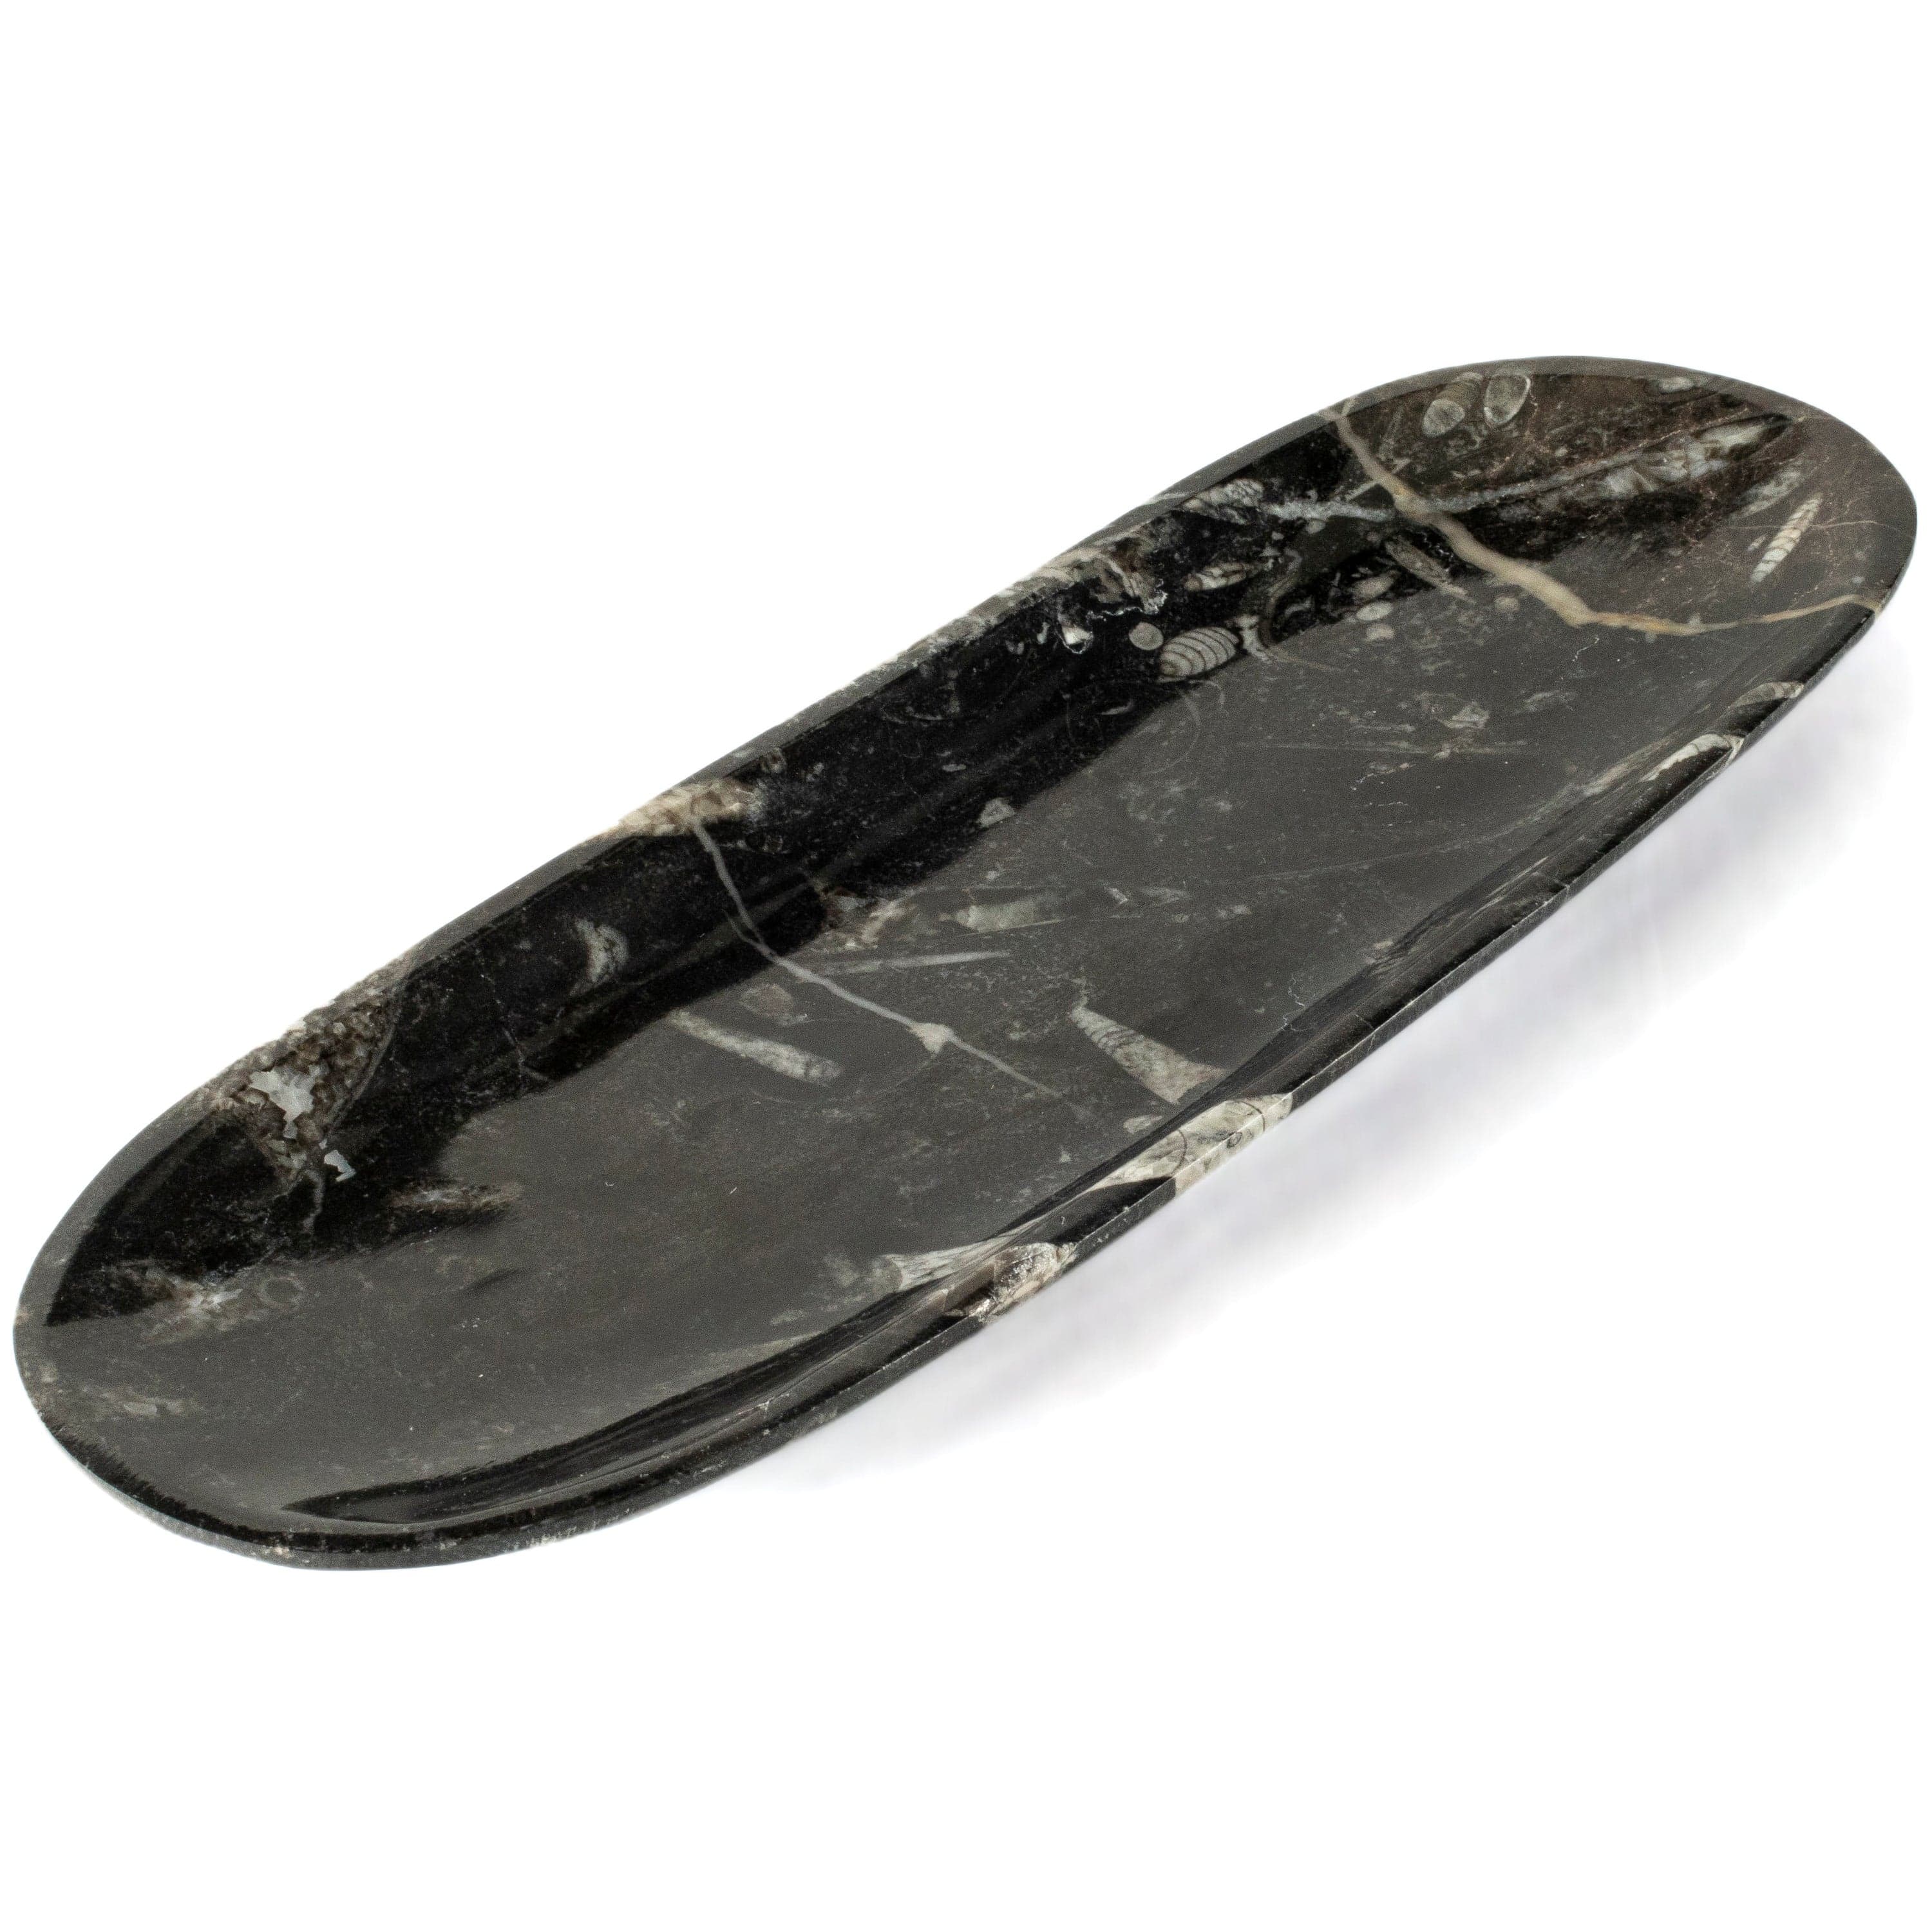 Kalifano Fossils & Minerals Natural Black Orthoceras Long Oval Bowl from Morocco- 12" BORO240